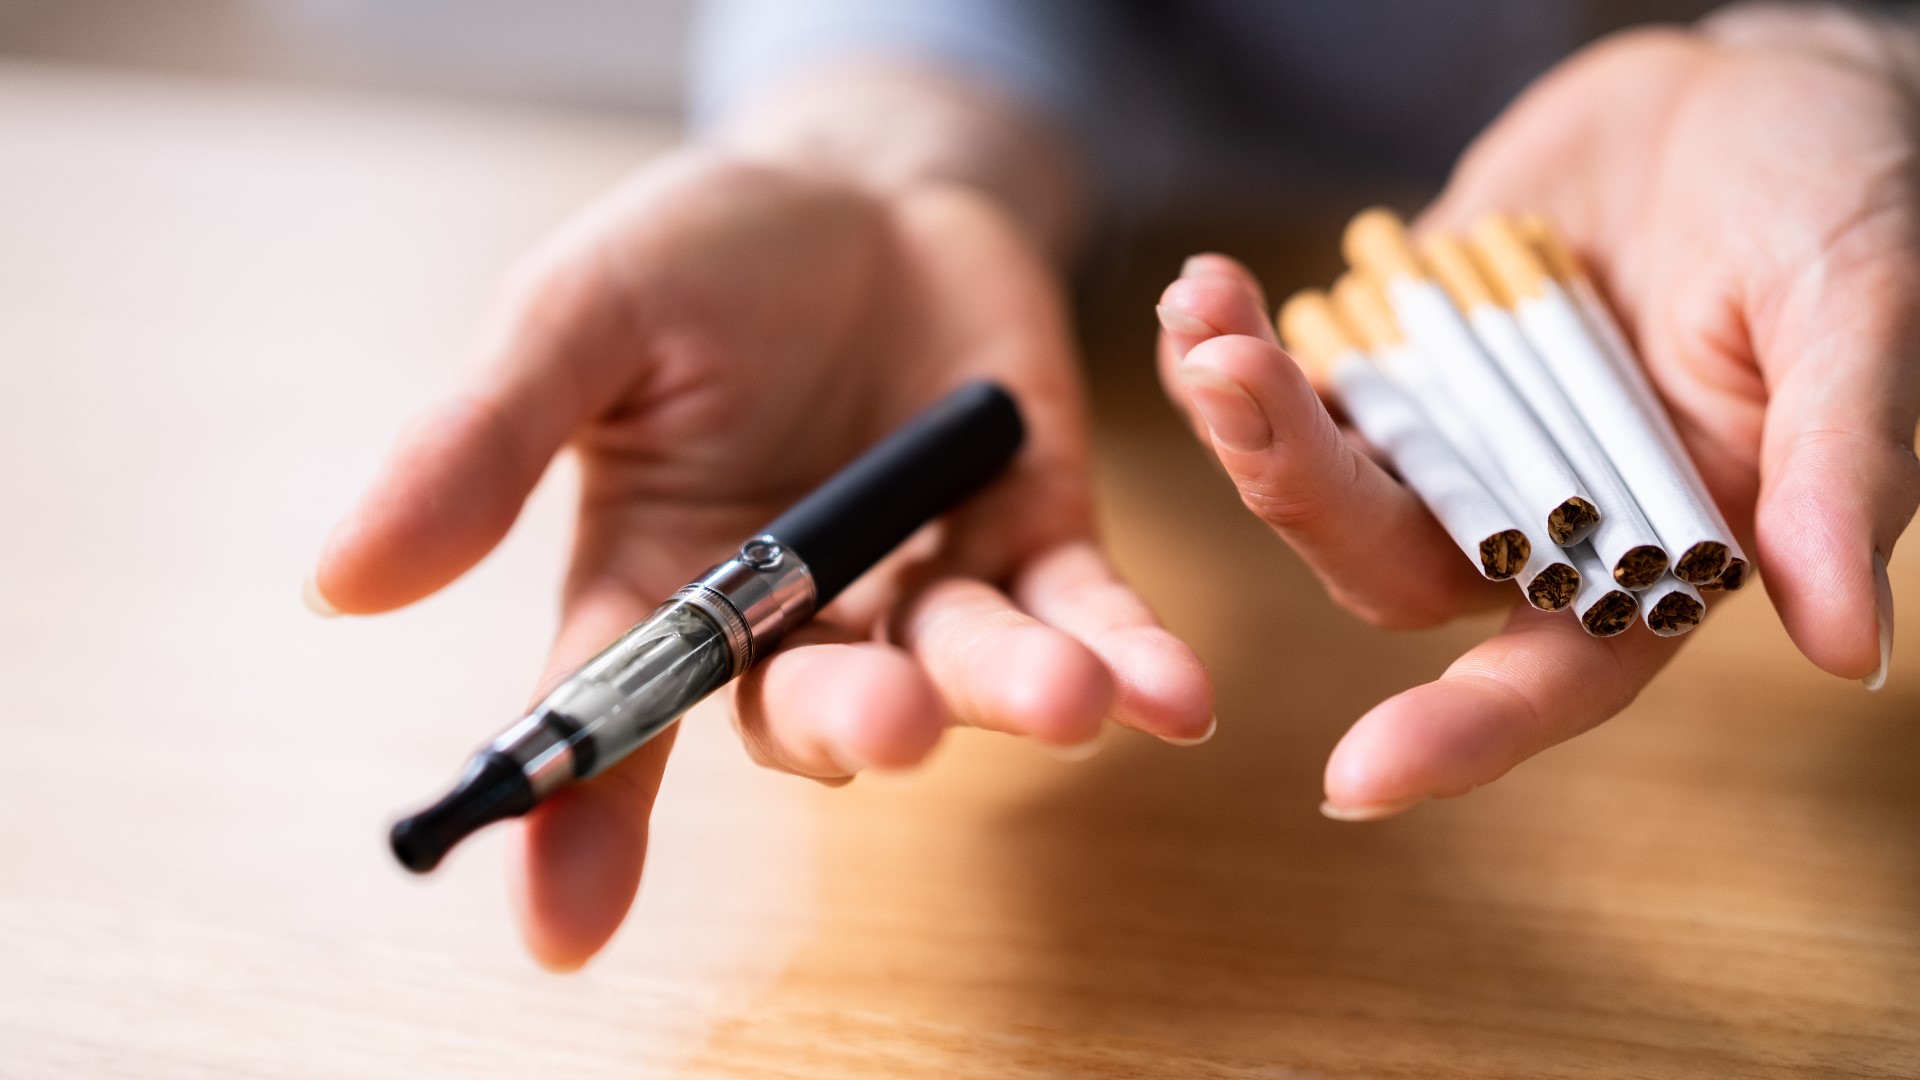 The UC Davis Comprehensive Cancer Center has launched the state's first-ever tobacco cessation policy research center.